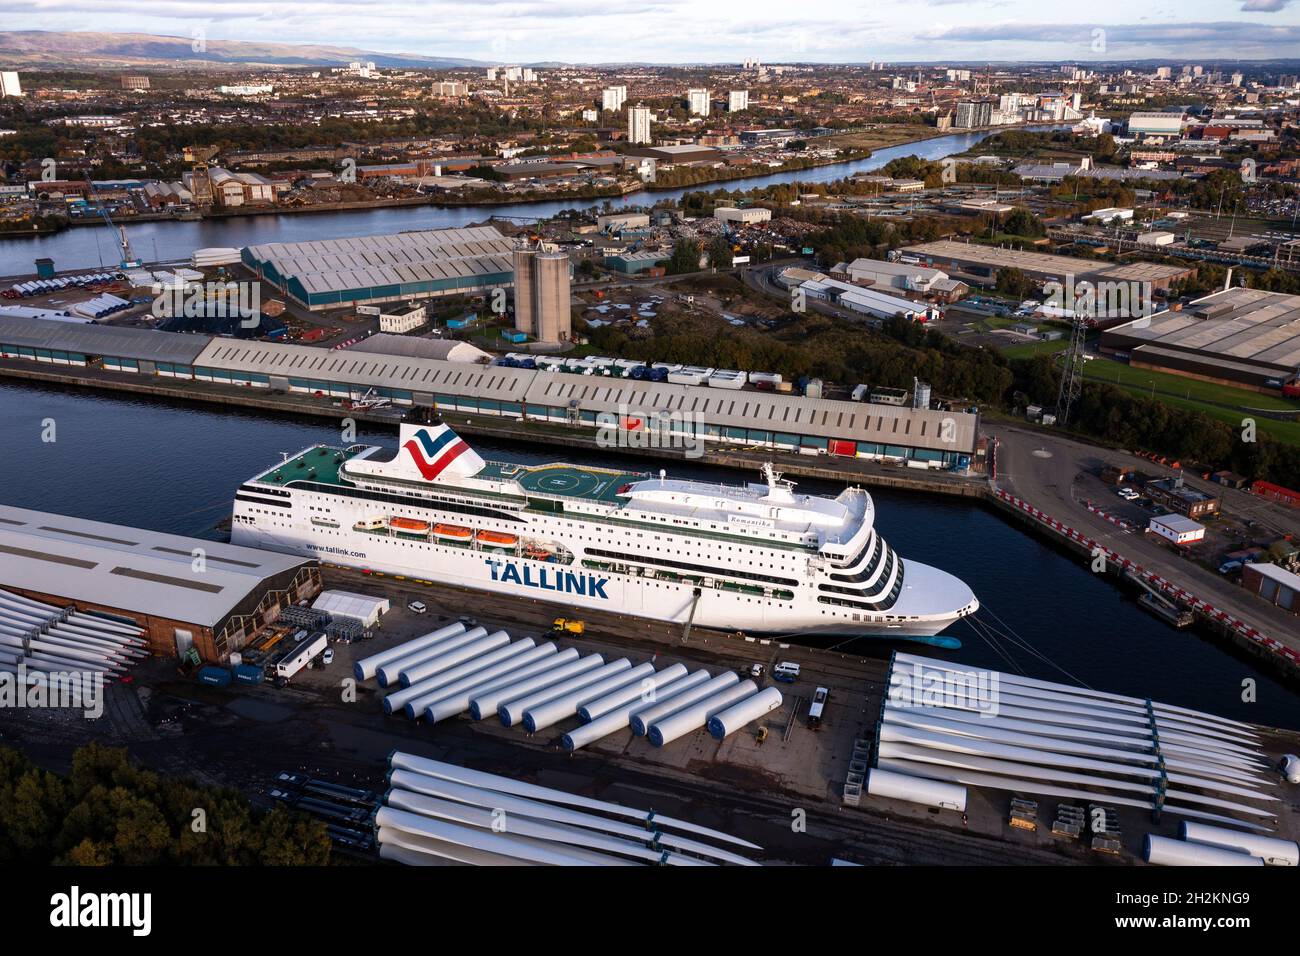 Glasgow, Scotland, UK. 22nd Oct, 2021. PICTURED: Aerial images of MS Romantika - a cruiseferry operated by the Estonian ferry company Tallink. Due to the COP26 Climate Change Conference expecting tens of thousands of people, a severe accommodation shortage has plagued Glasgow, so the climate change summit organisers have organised 2 ships - this one (pictured) currently berthed in George V Dock off the river Clyde in a bid to alleviate the hotel shortage problem. COP26 starts on 31 October. Credit: Colin Fisher/Alamy Live News Stock Photo